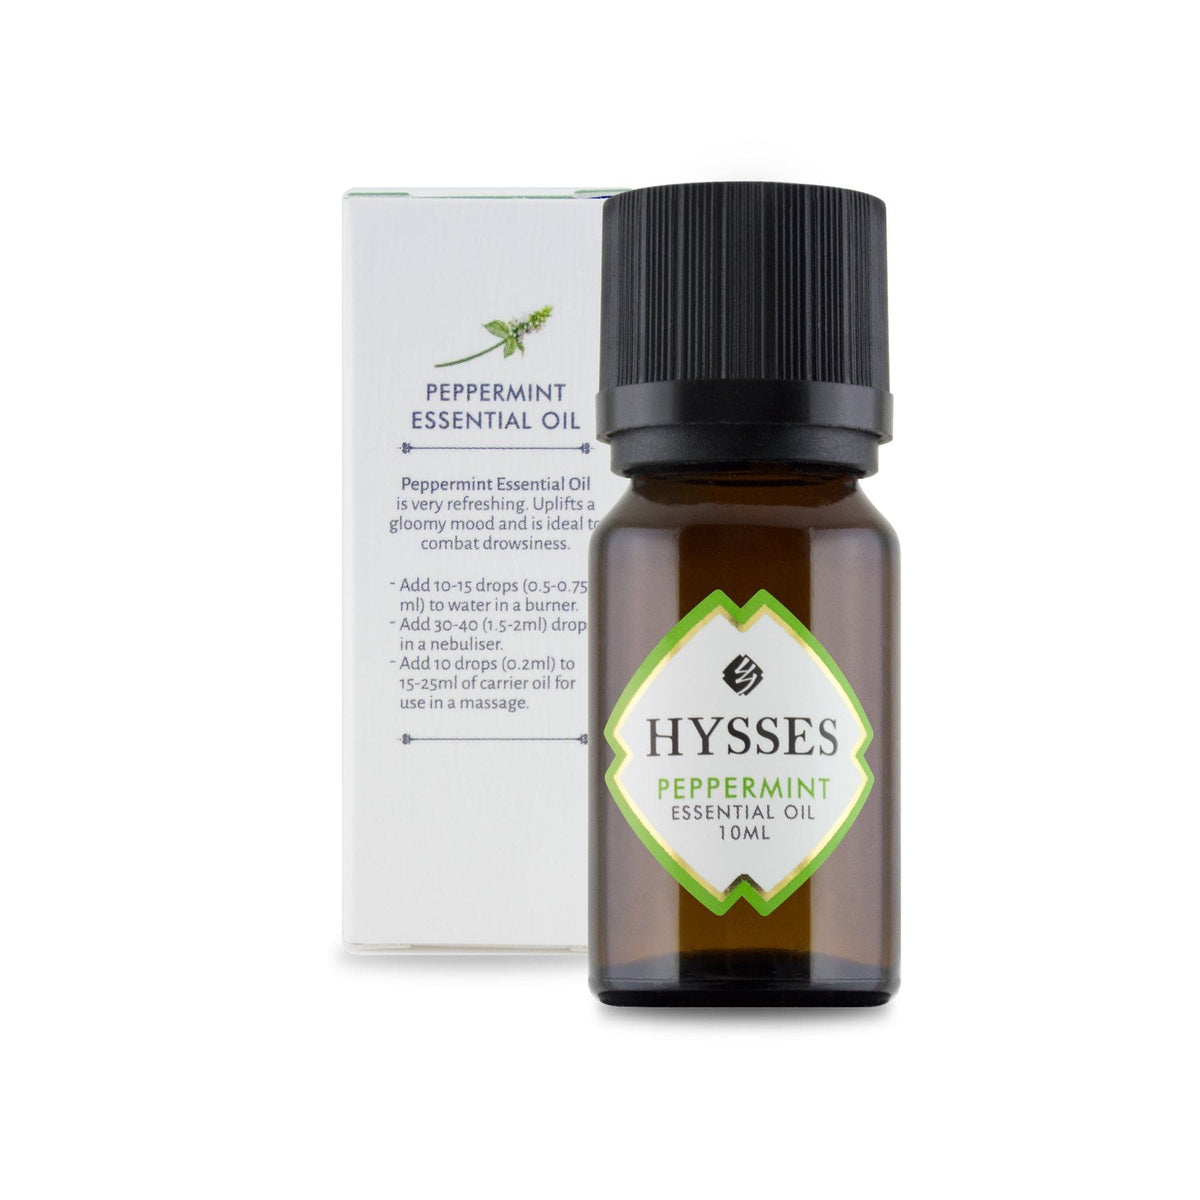 Hysses Essential Oil Essential Oil Peppermint